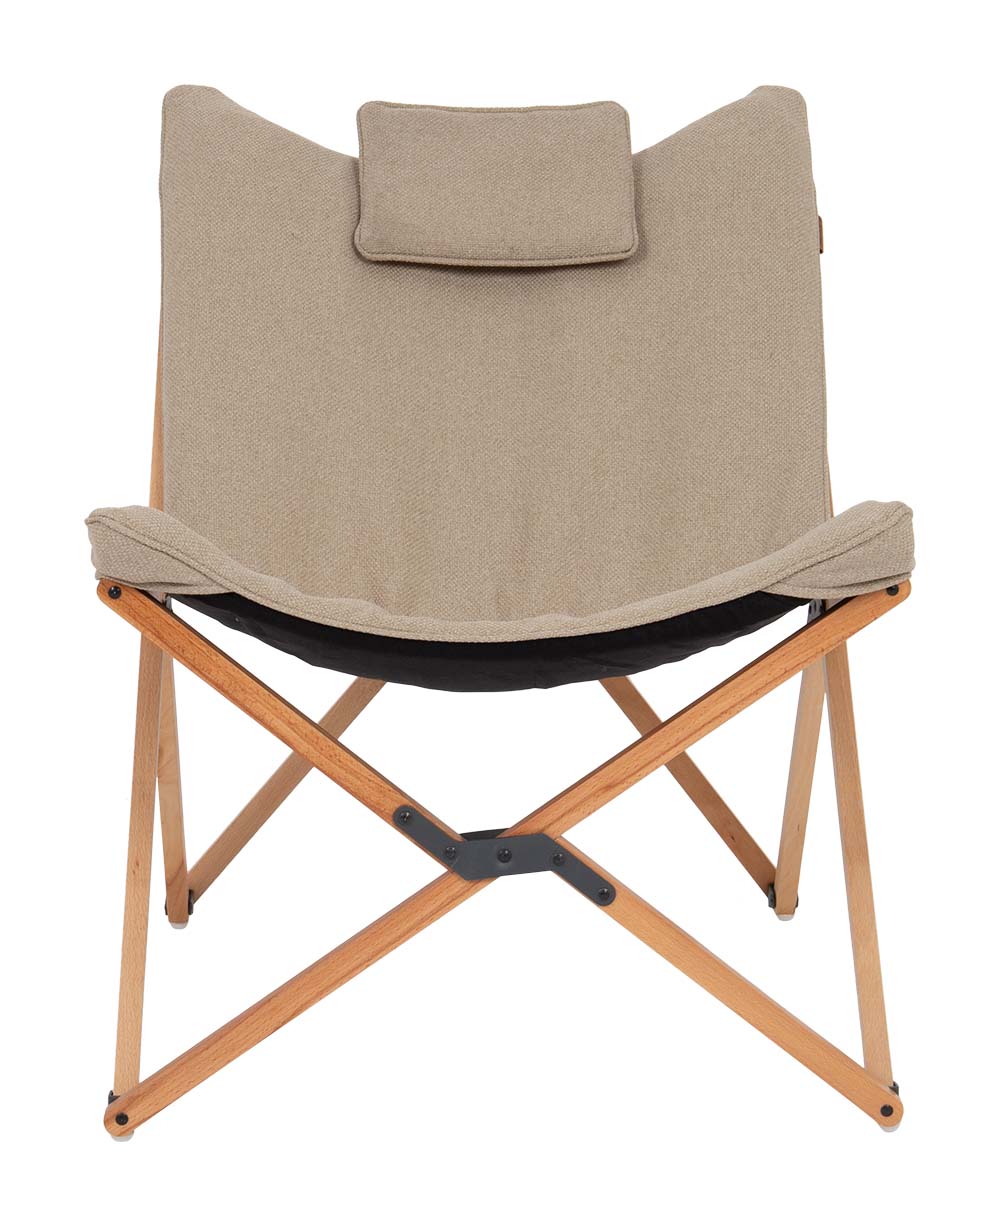 Bo-Camp - Urban Outdoor collection - Relaxstoel - Wembley - M - Nika - Beige detail 2